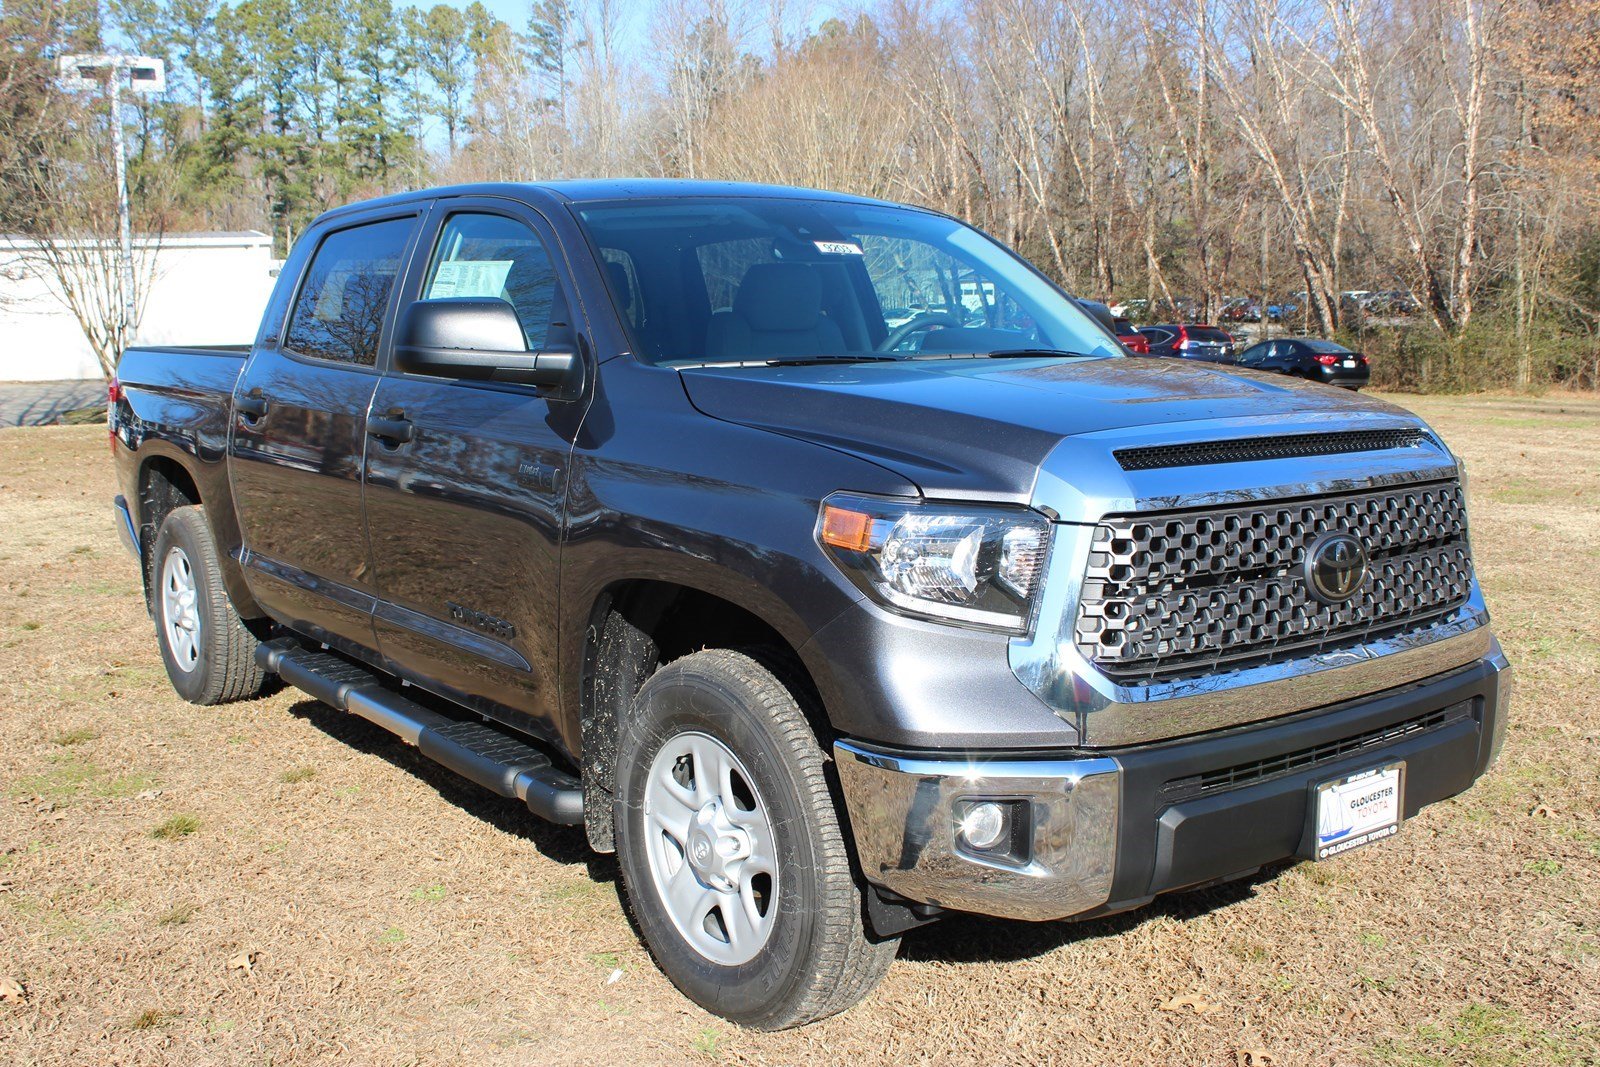 New 2020 Toyota Tundra 4WD SR5 Crew Cab Pickup in Gloucester #9203